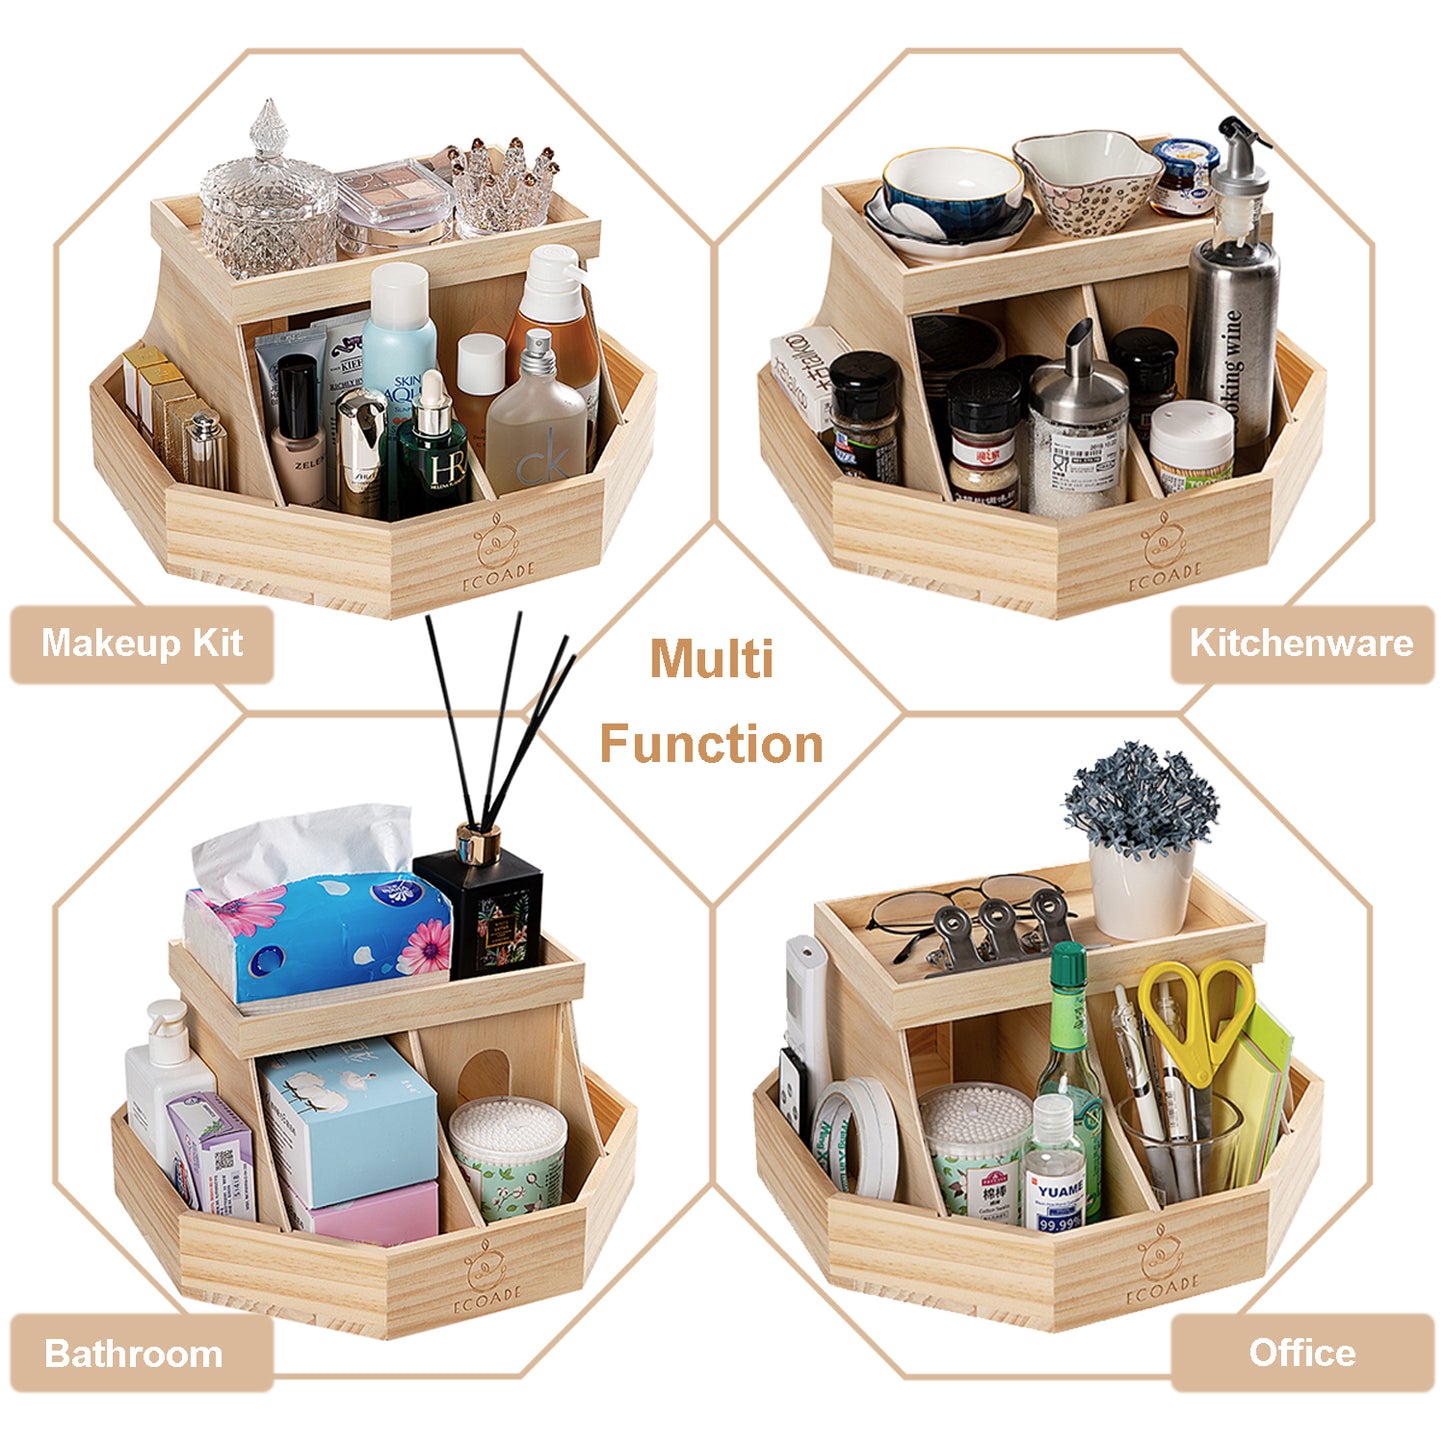 ECOADE Wooden Diaper Caddy Organizer - 360 Degrees Rotating Caddy with Removable Dividers, Nursery Diaper Organizer